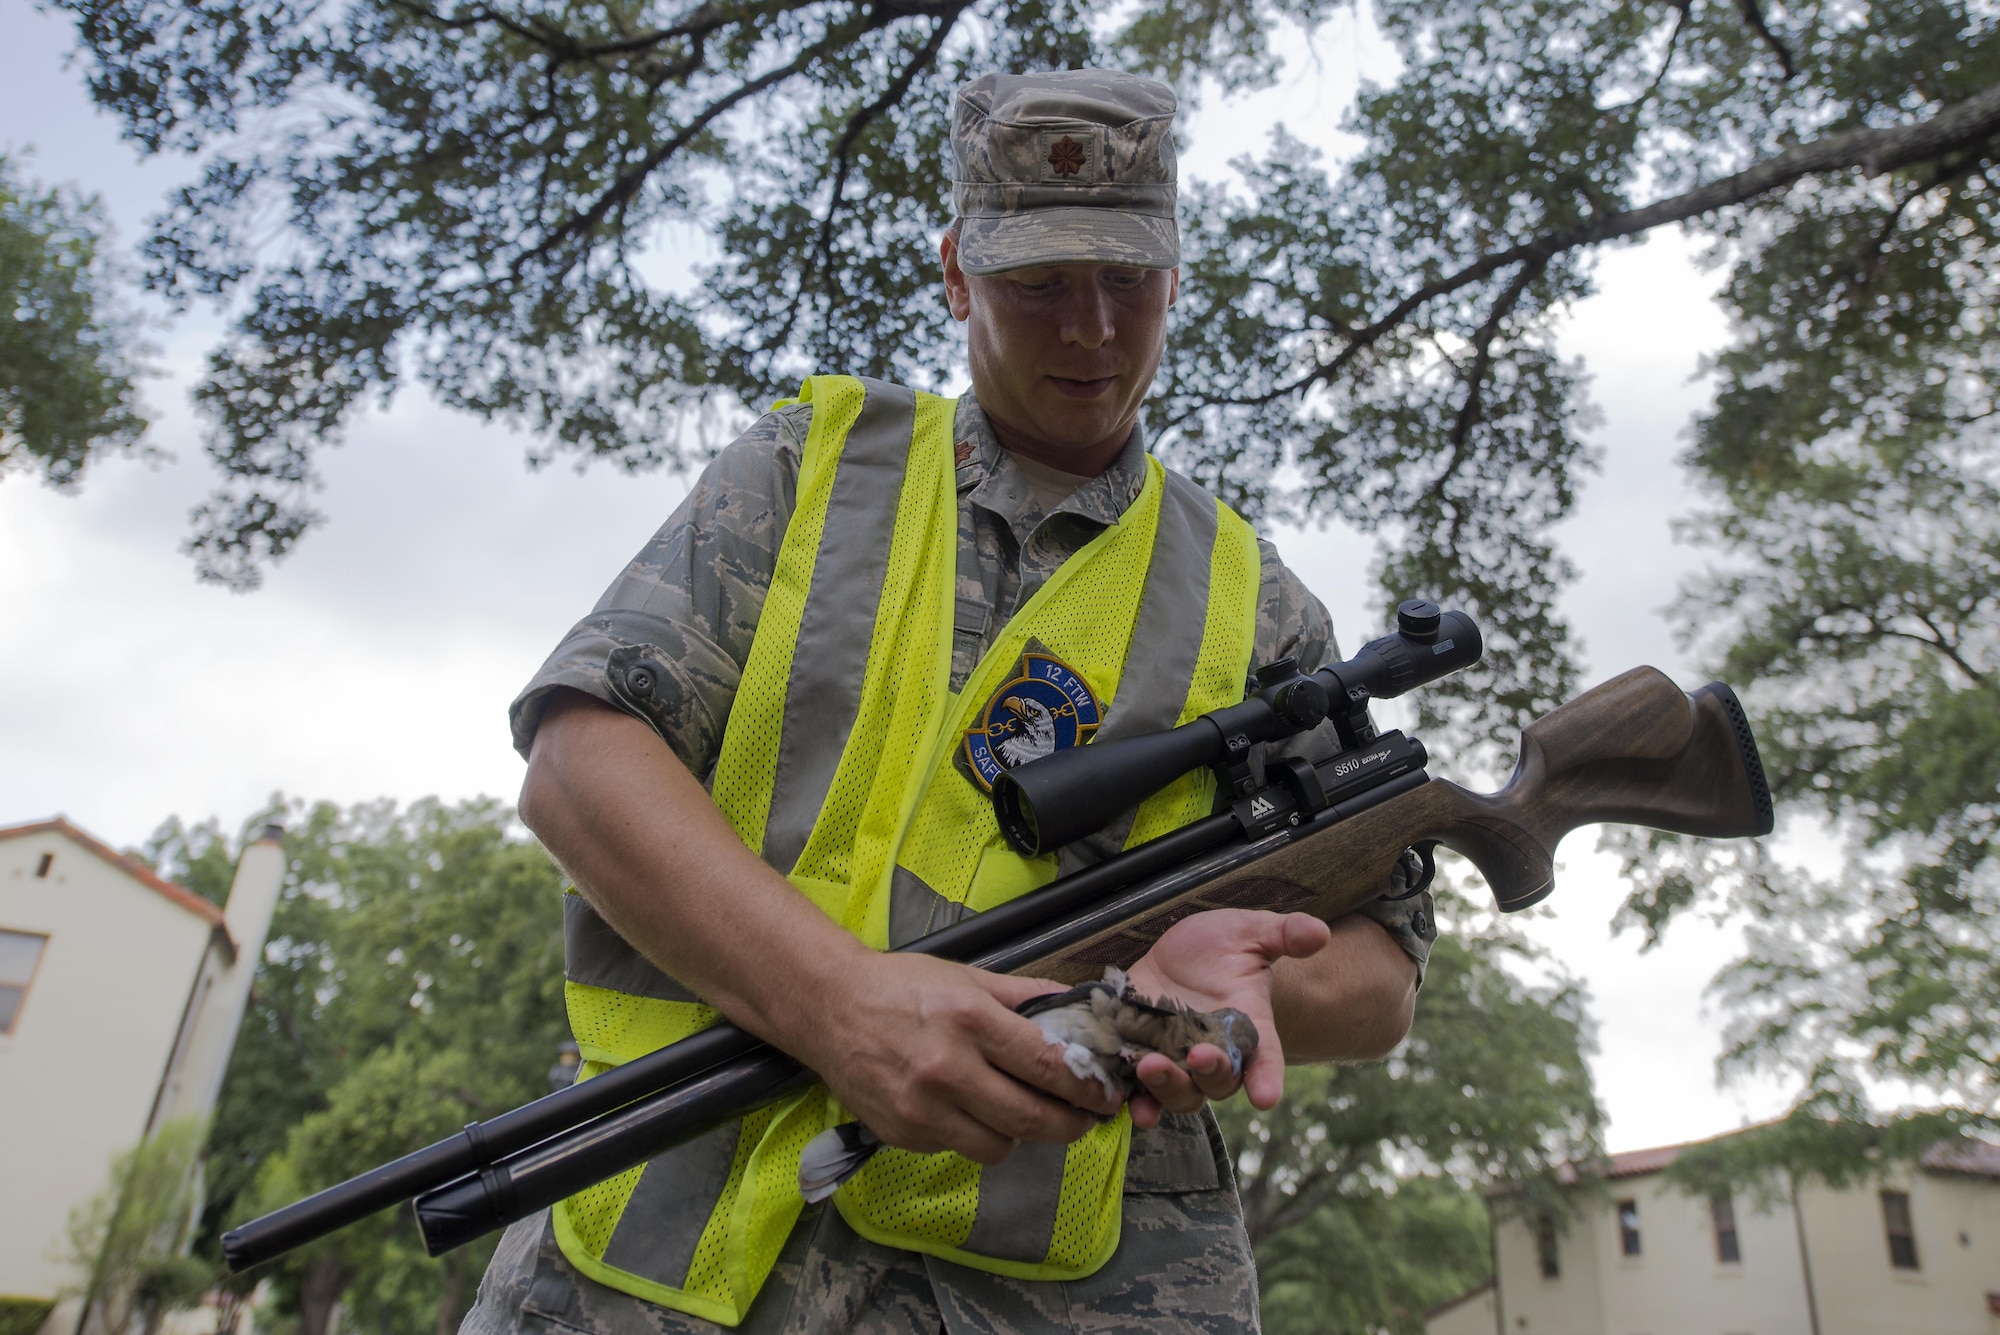 Maj. Jason Powell, 12th Flying Training Wing chief of flight safety, gathers a white-winged dove after striking it with the air pellet rifle July 13, 2016 at Joint Base San Antonio-Randolph. The Bird/Wildlife Aircraft Strike Hazard Program reduces the threat that the nearly 400 different species of birds pose each year as they travel along the Central Americas Flyway.